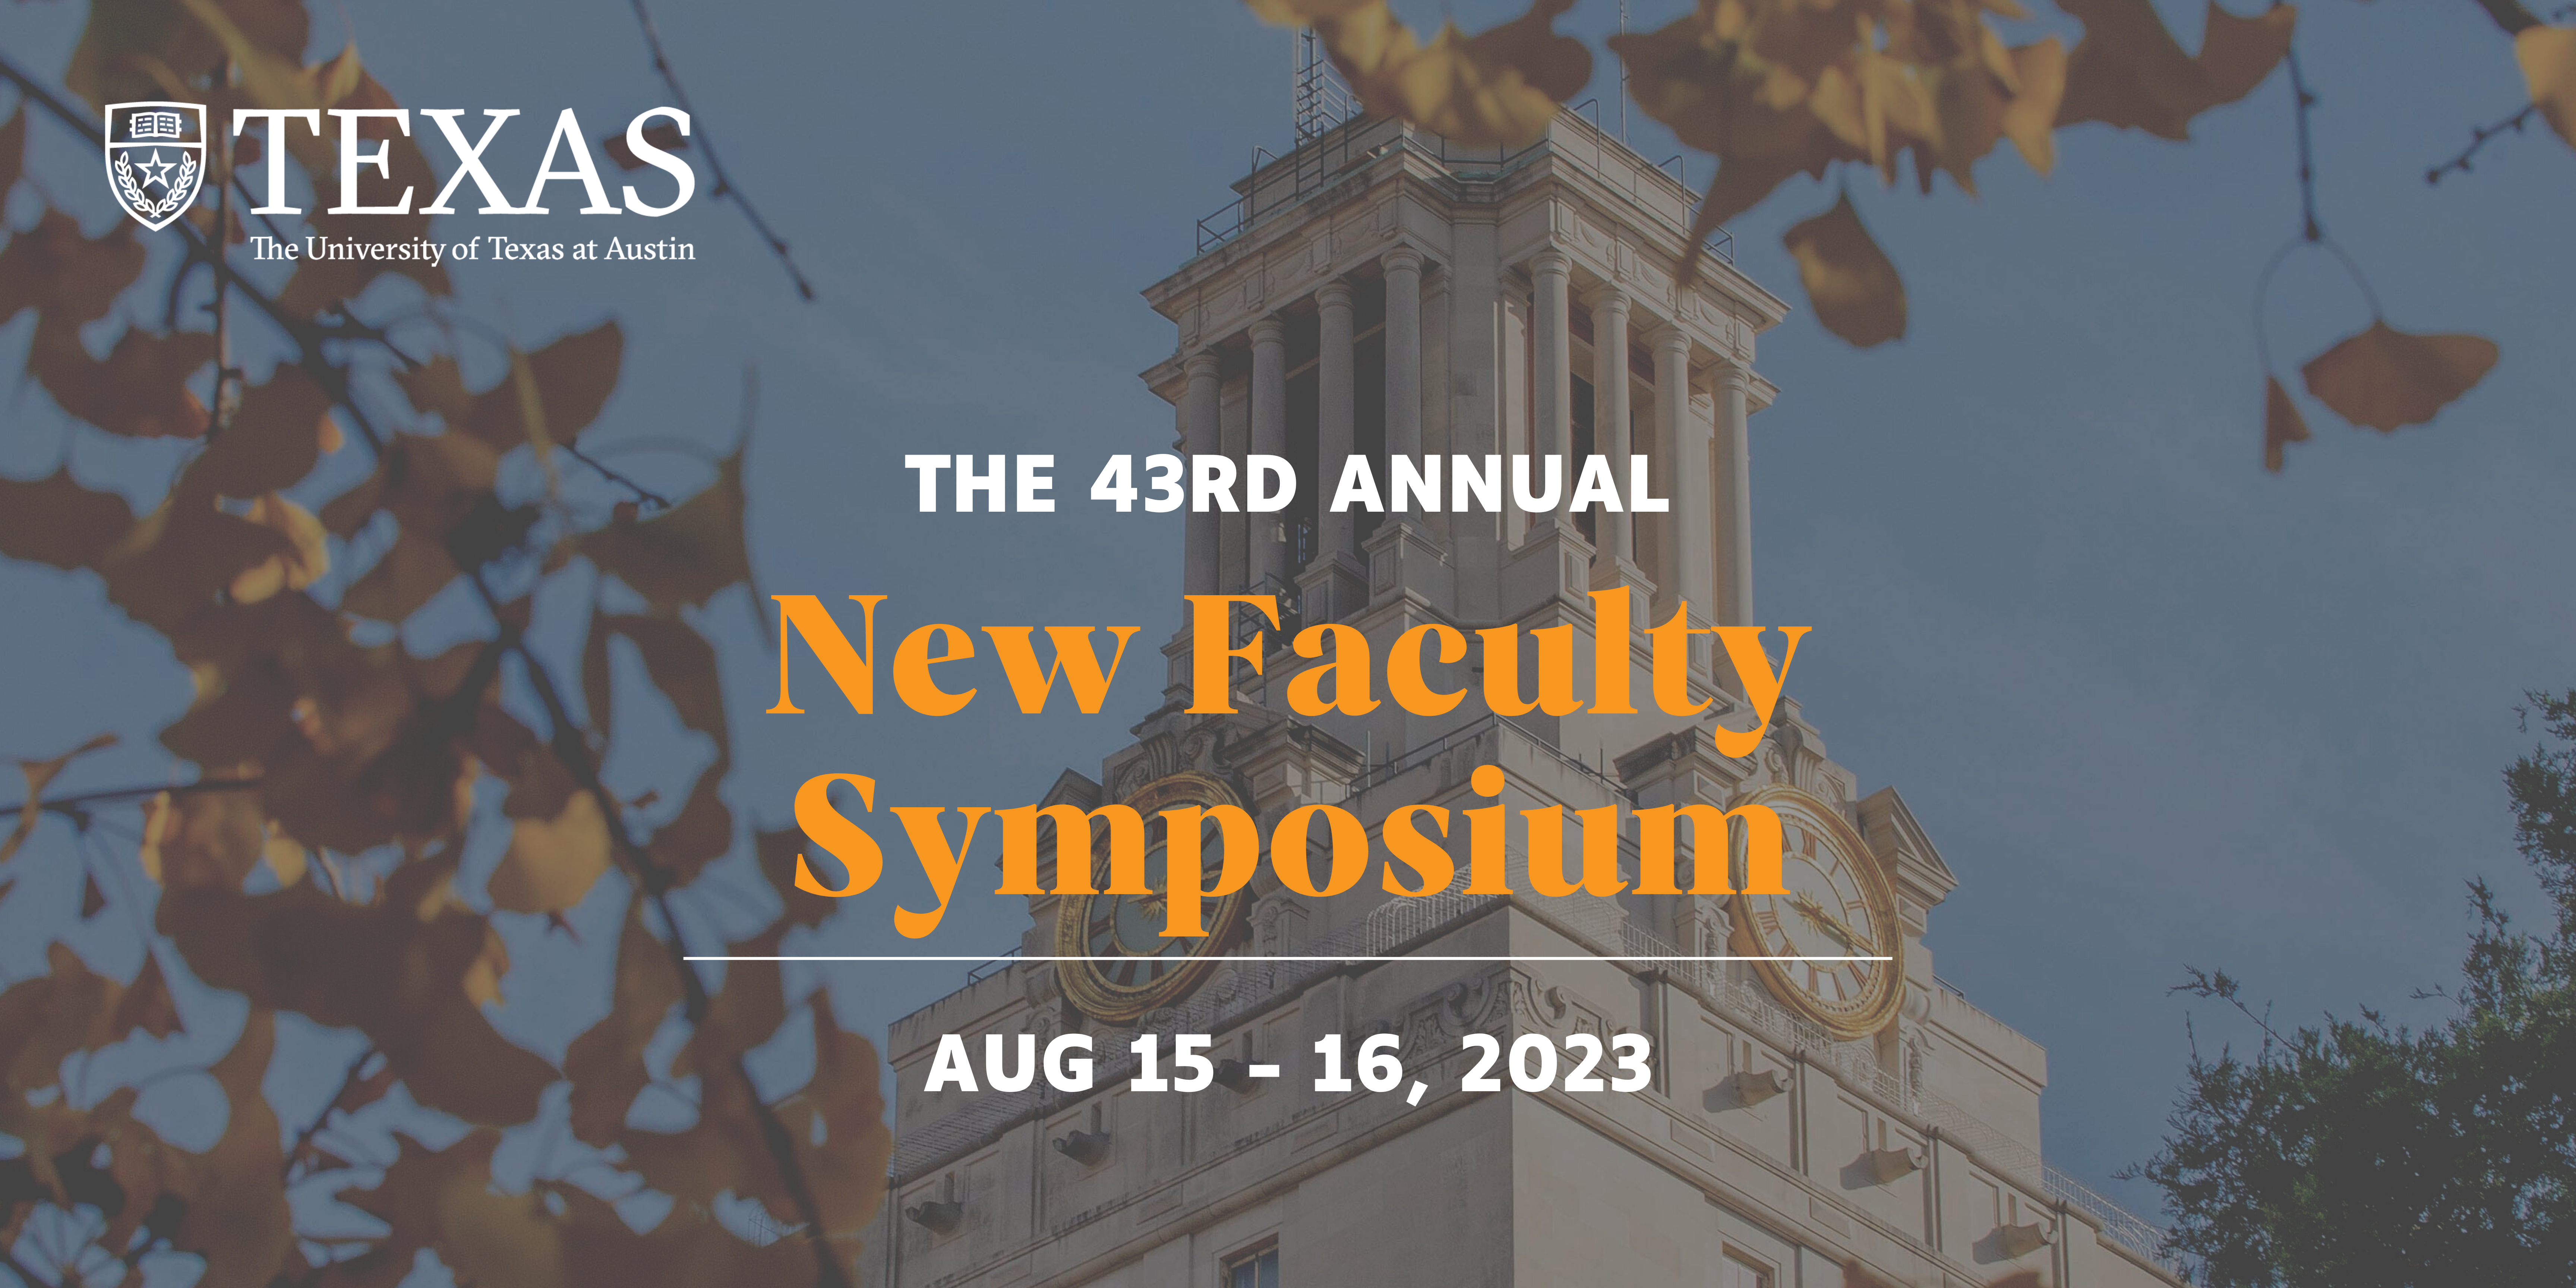 Image of the UT Tower with the following text: "The 43rd Annual New Faculty Symposium, August 15-16, 2023"